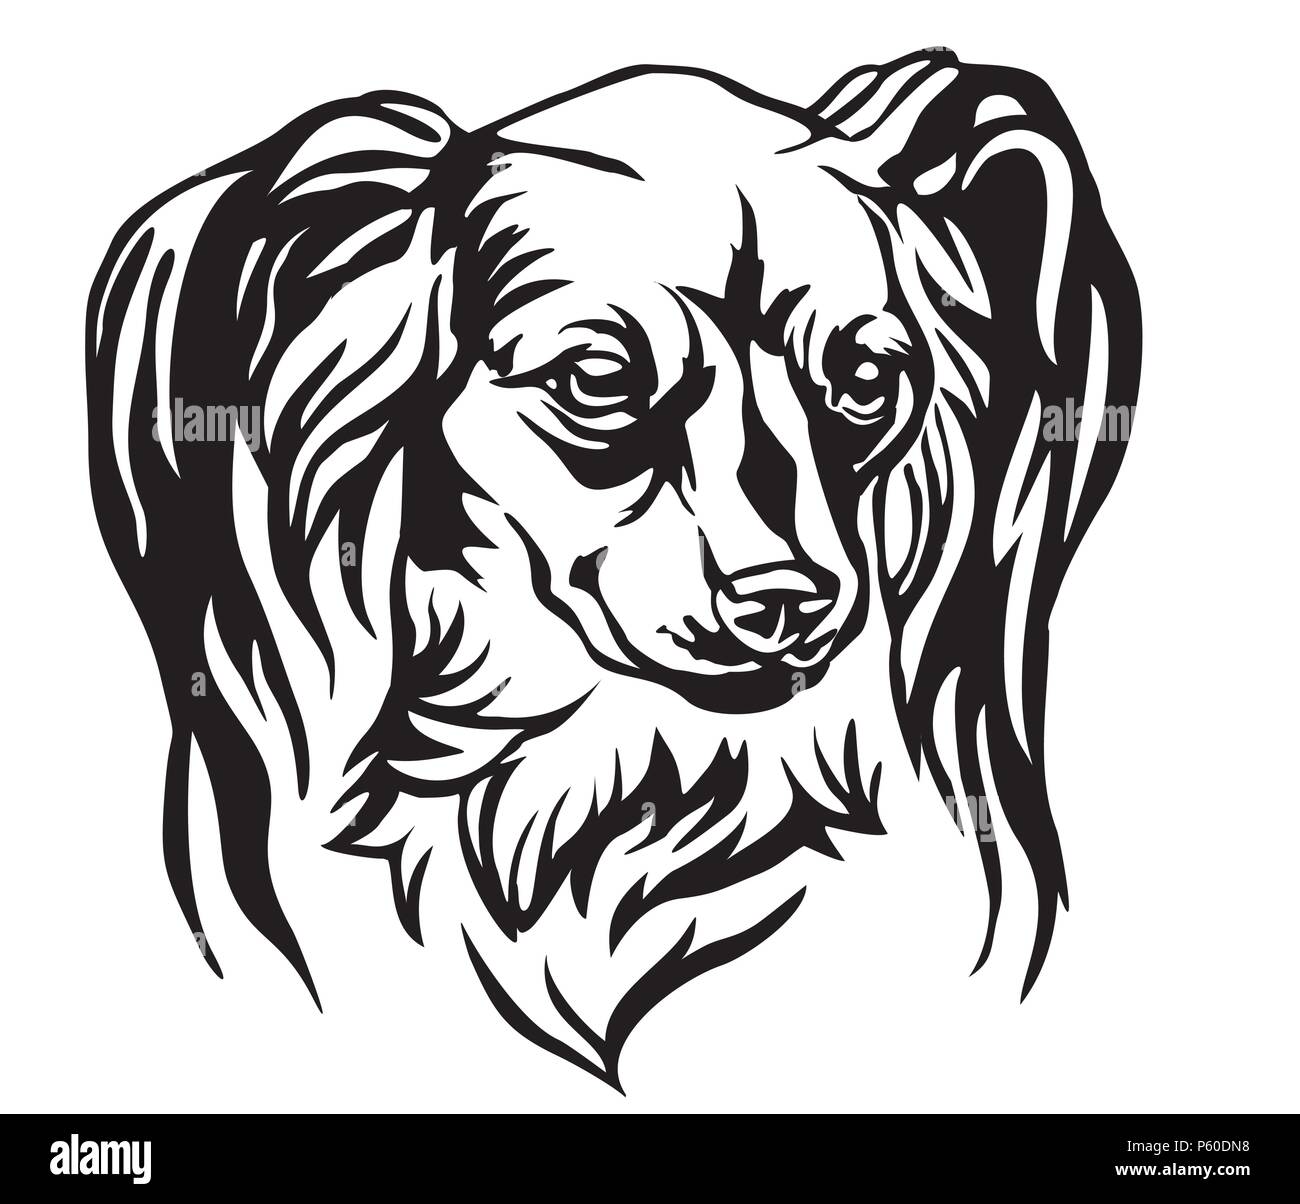 Decorative portrait of Dog Long haired Russian Toy Terrier, vector isolated illustration in black color on white background. Image for design and tatt Stock Vector